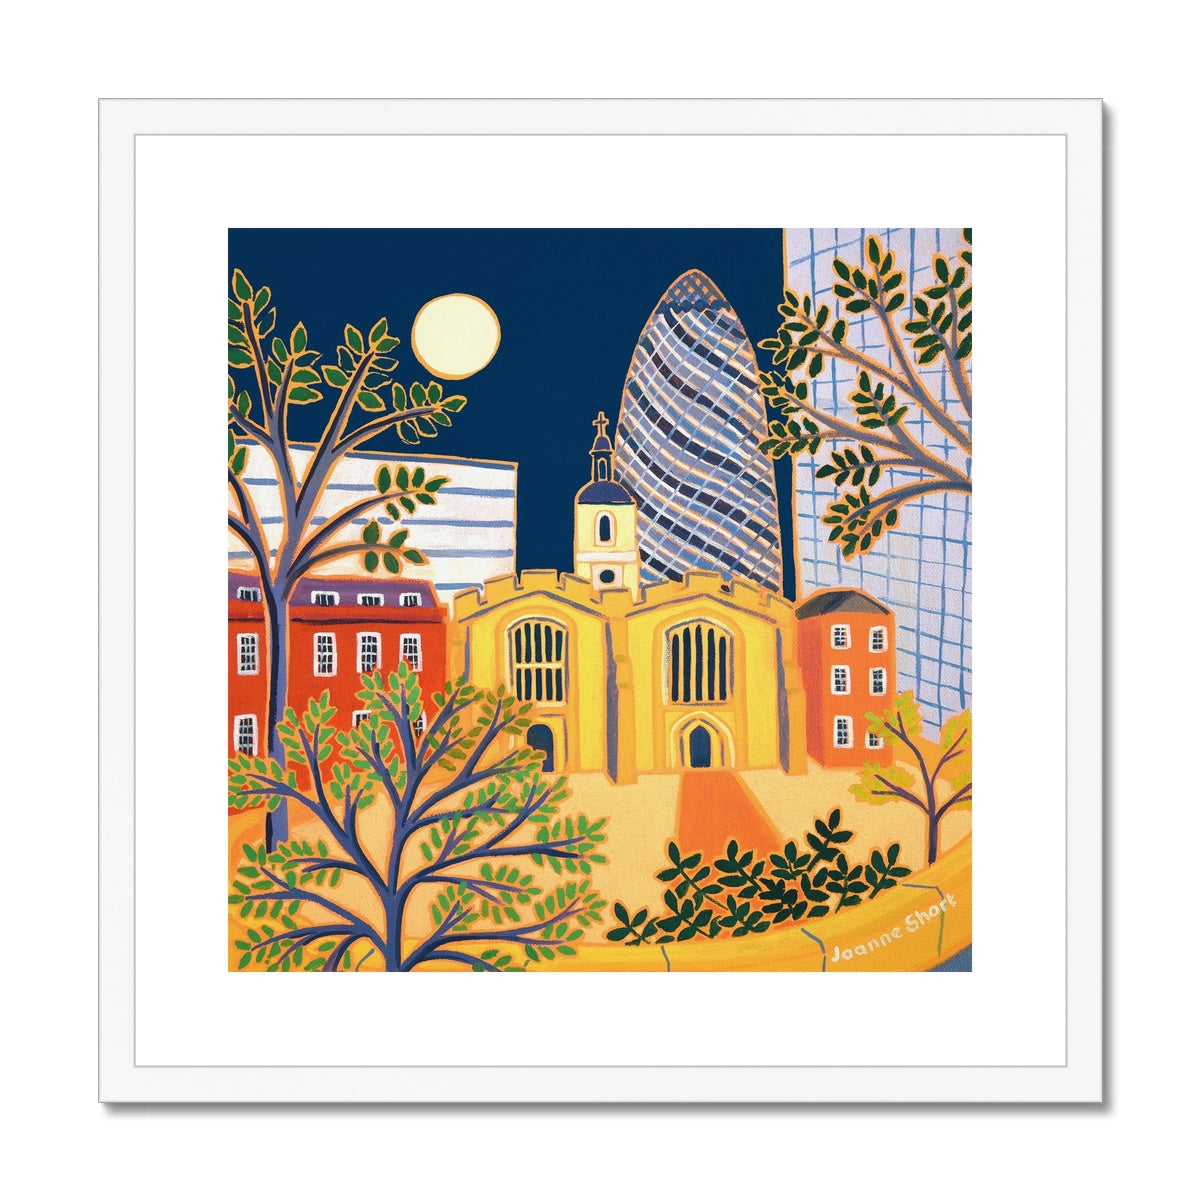 Joanne Short Framed Open Edition London Fine Art Print. &#39;The Old and the New, St Helen&#39;s Bishopsgate Church &amp; The Gherkin London&#39;.